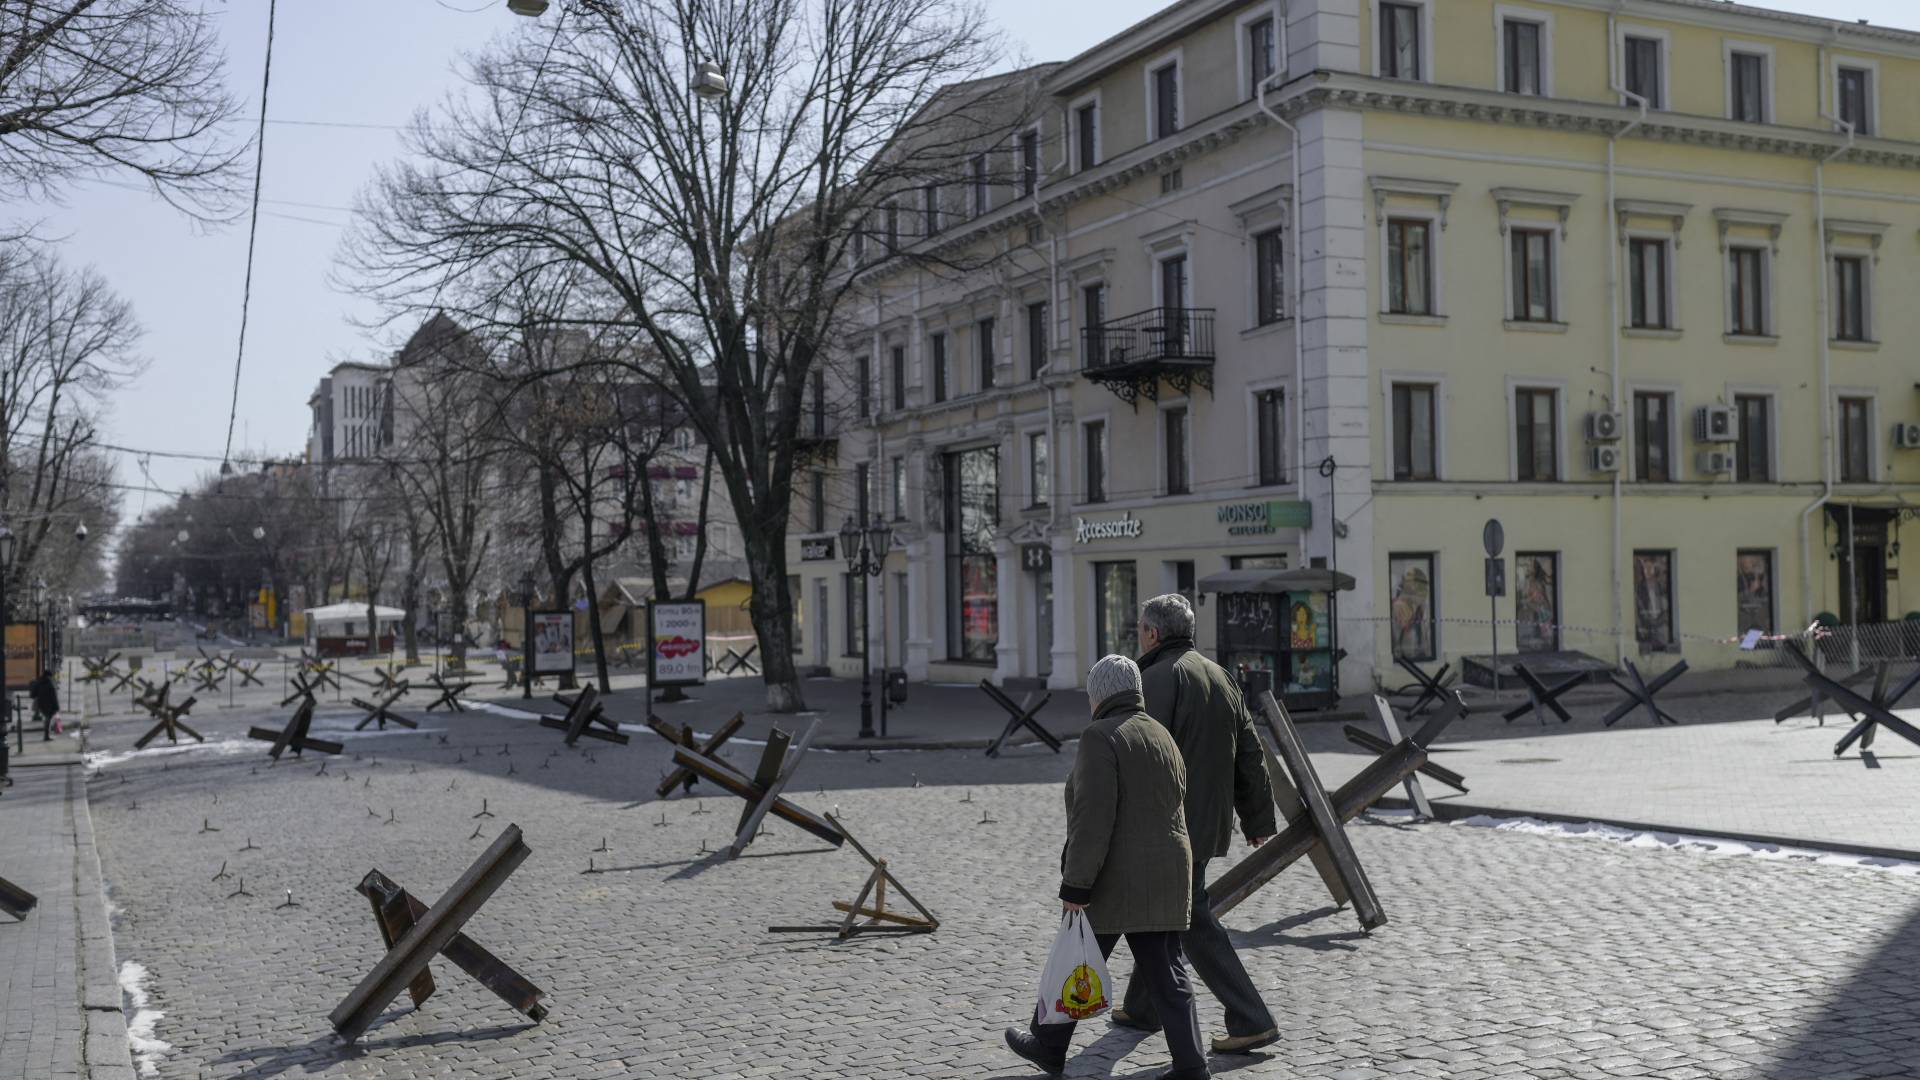 Residents cross an empty street next to anti-tank obstacles in Odessa on March 13, 2022.